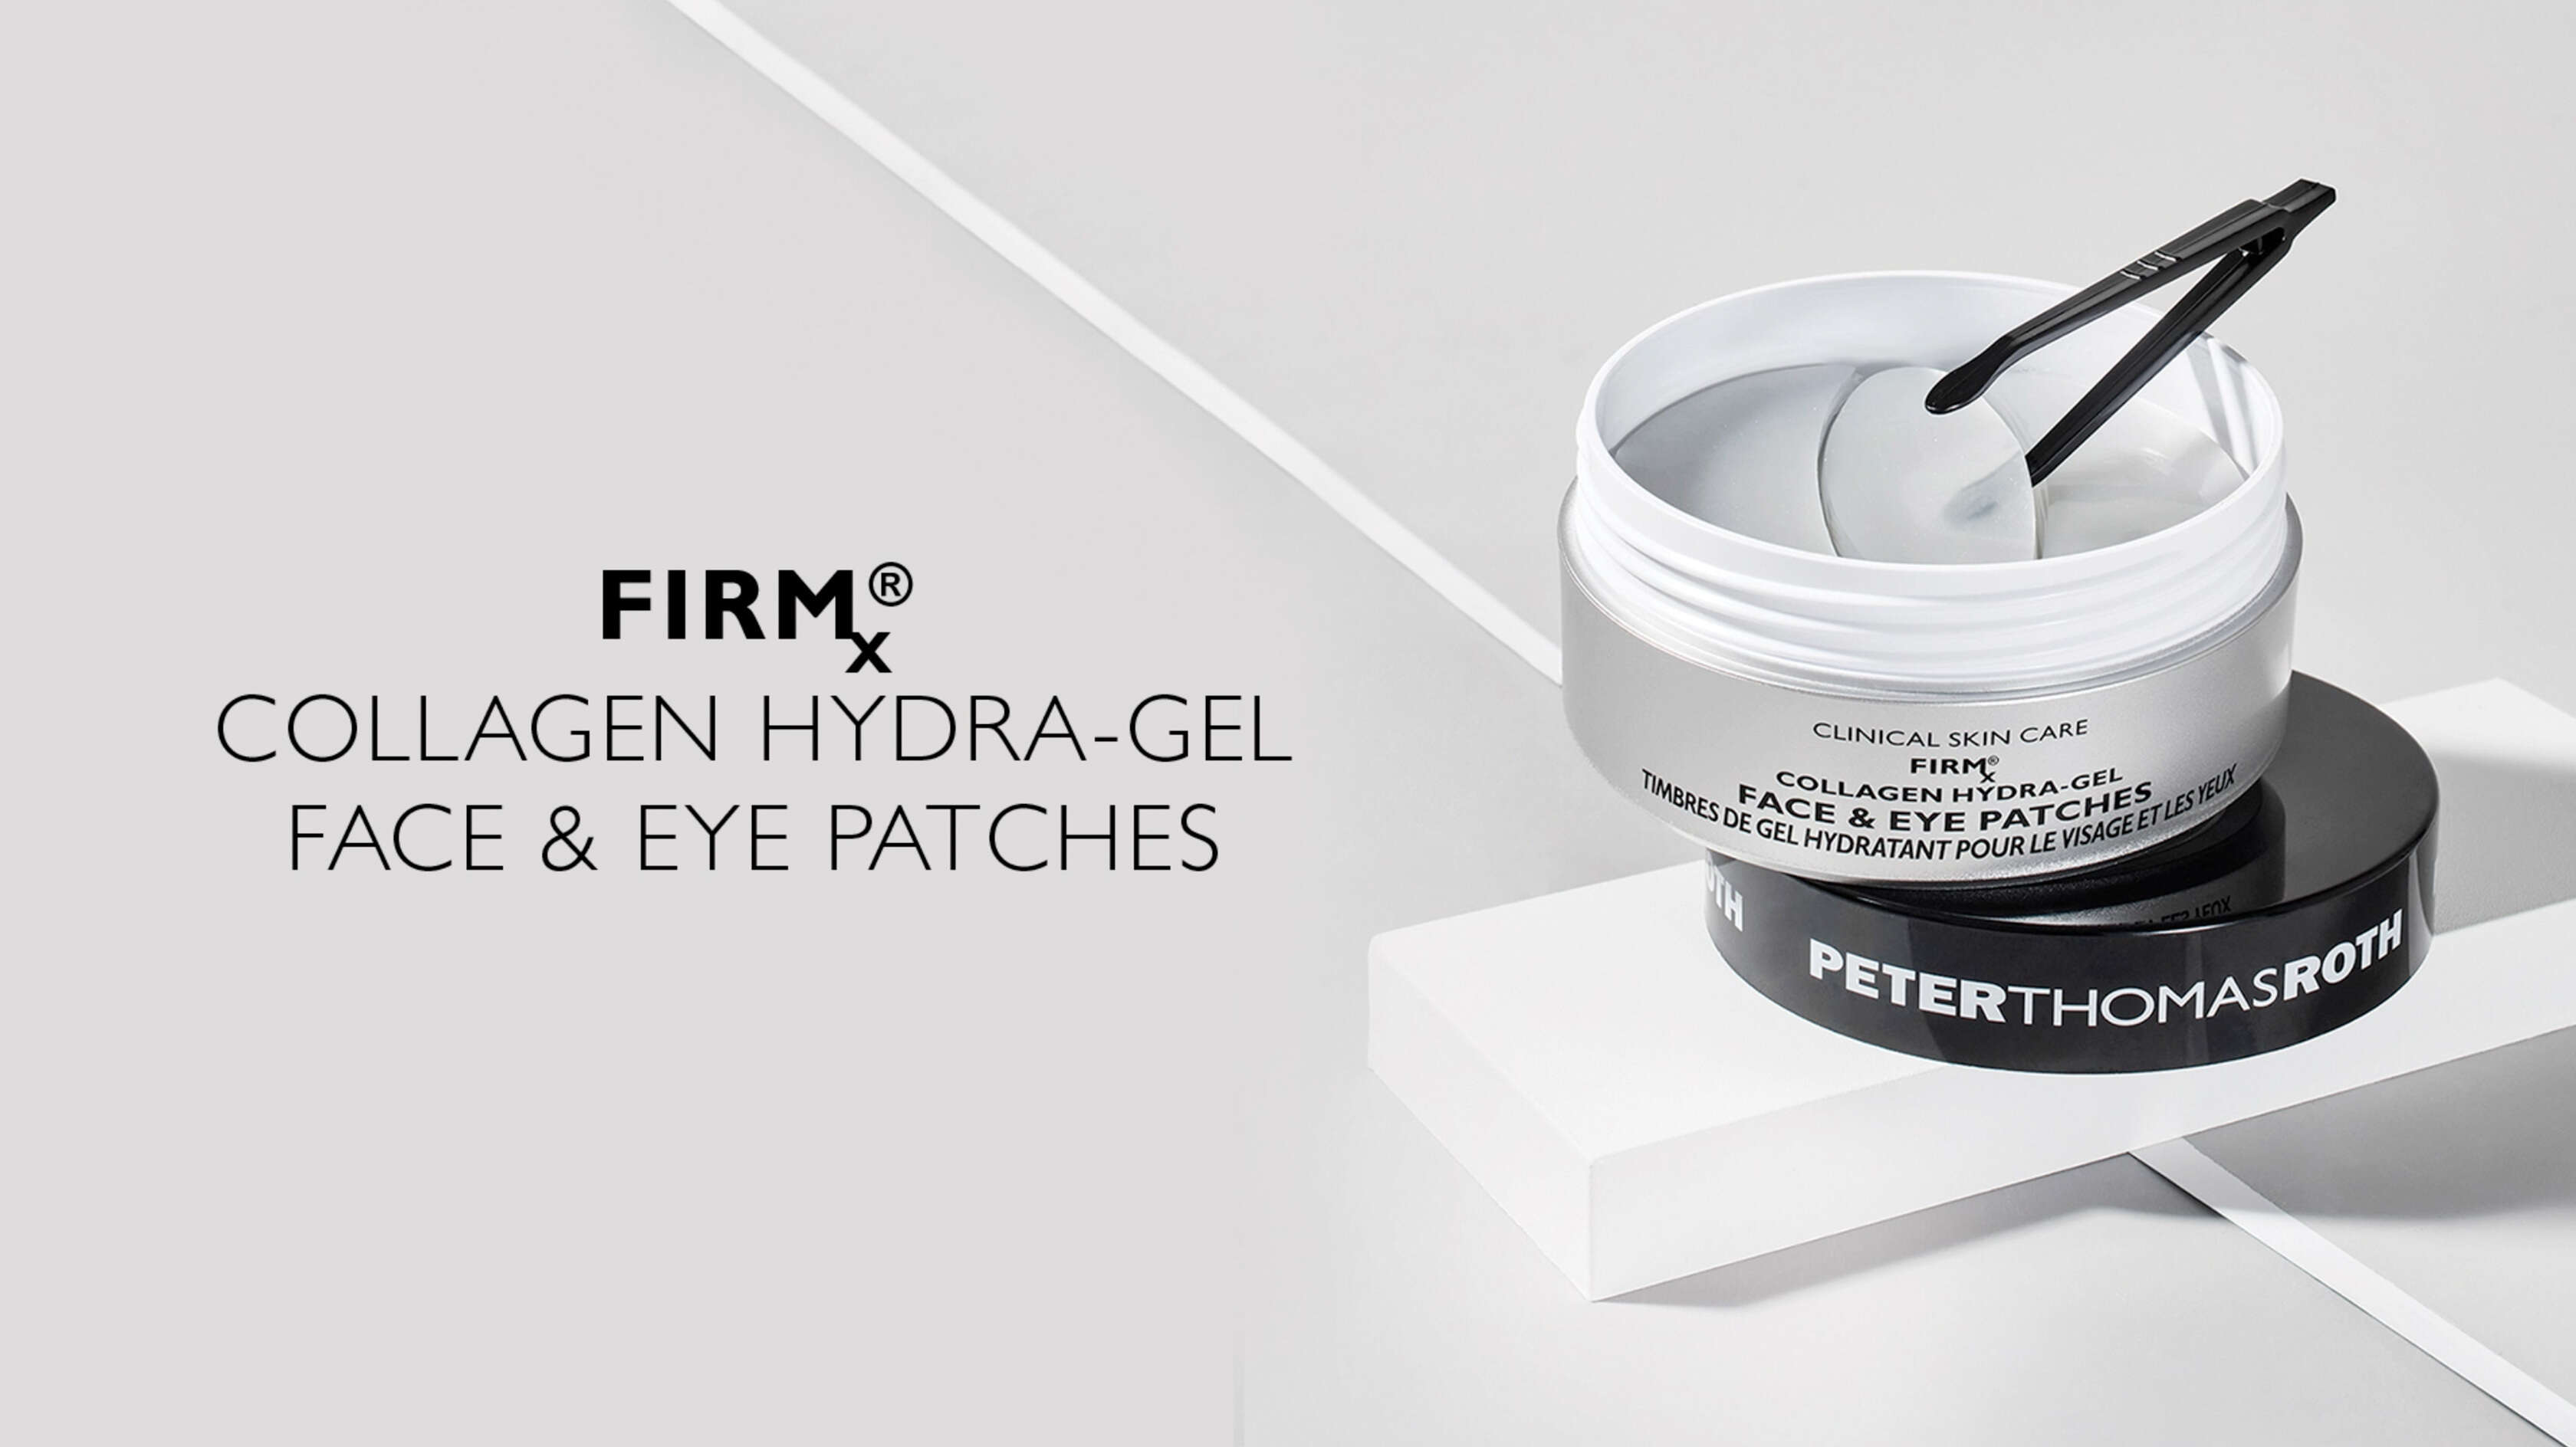 FIRMx Collagen Hydra-Gel Face & Eye Patches | Peter Thomas Roth